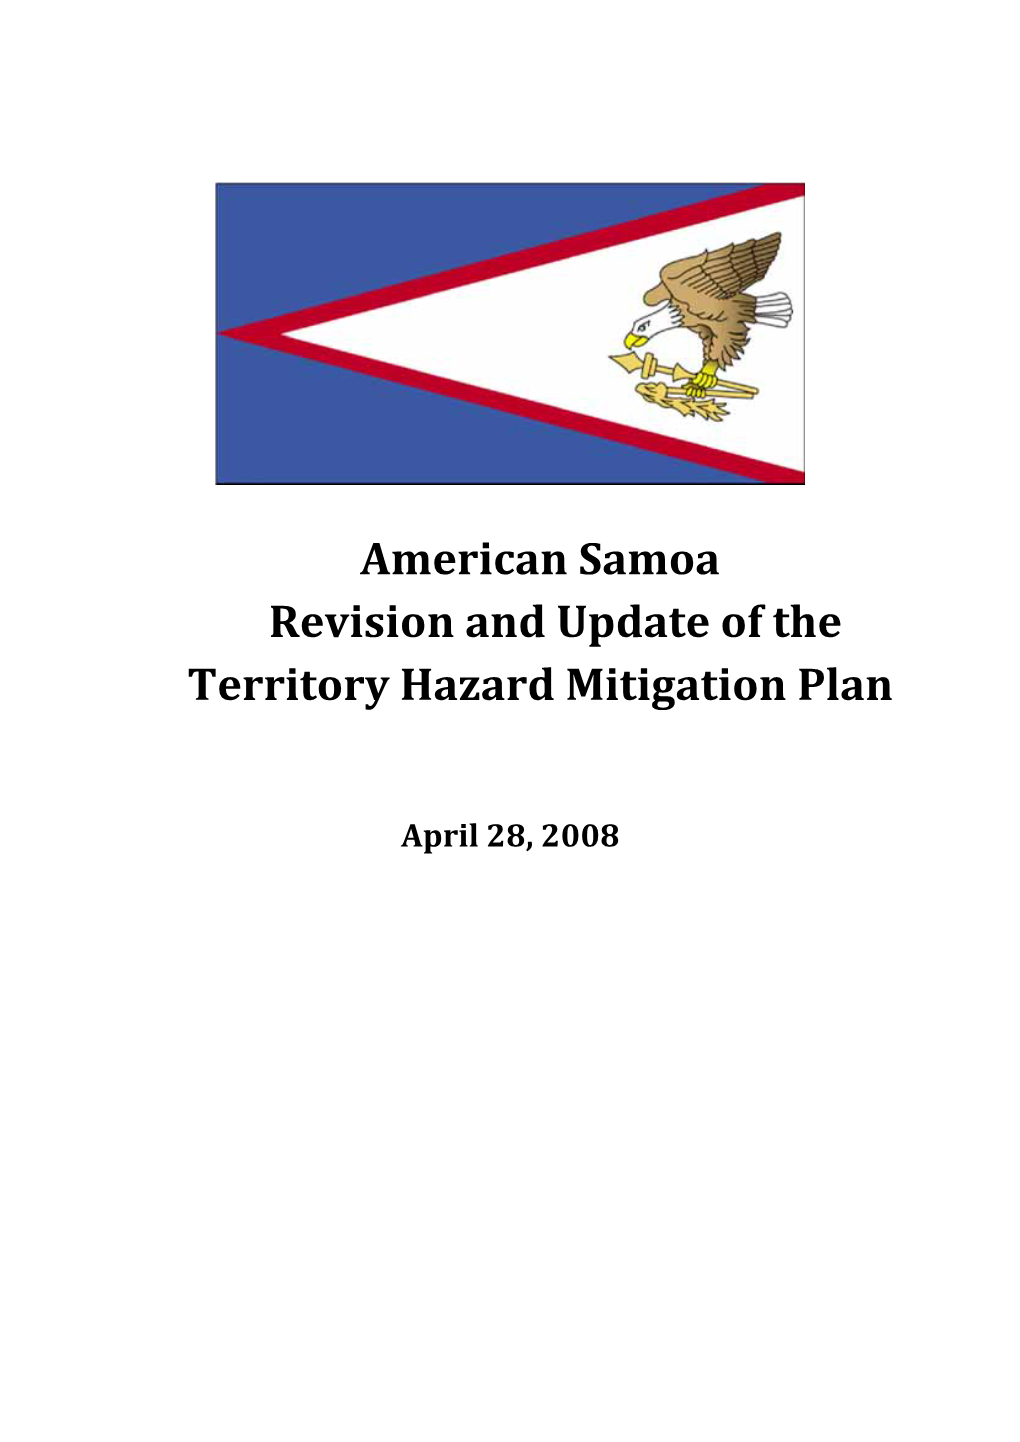 American Samoa Revision and Update of the Territory Hazard Mitigation Plan